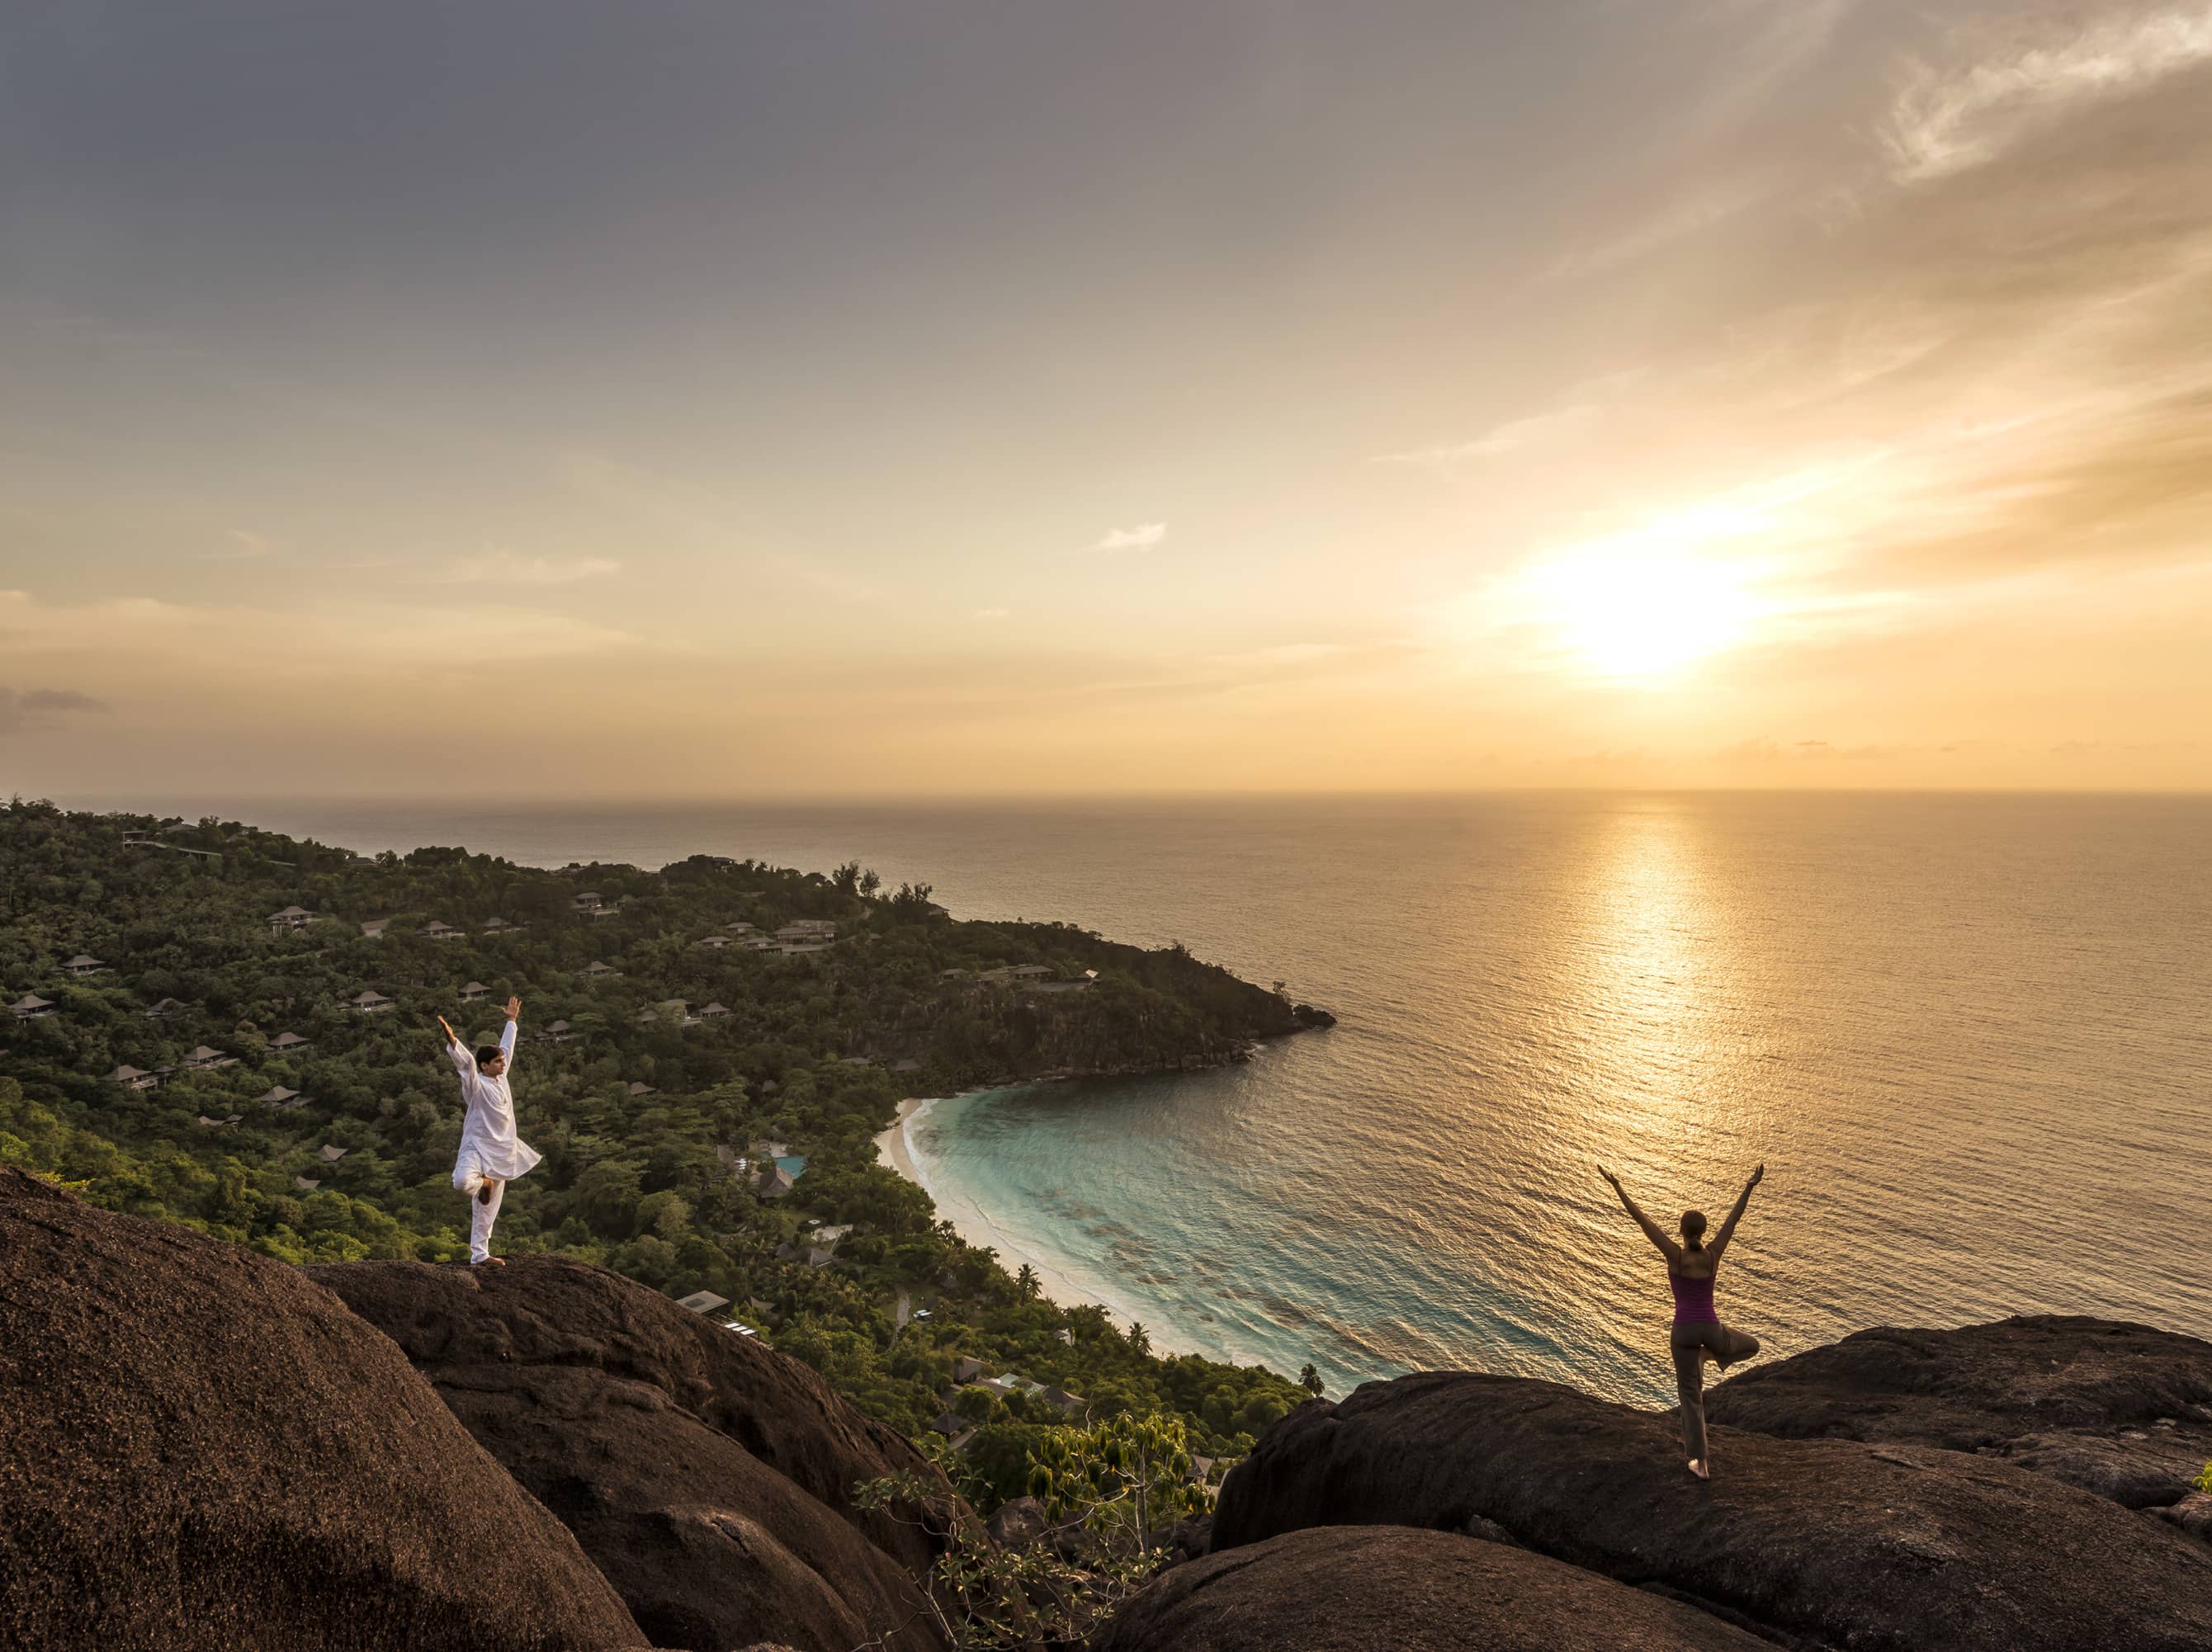  Meditate on a mountaintop in the Seychelles.  